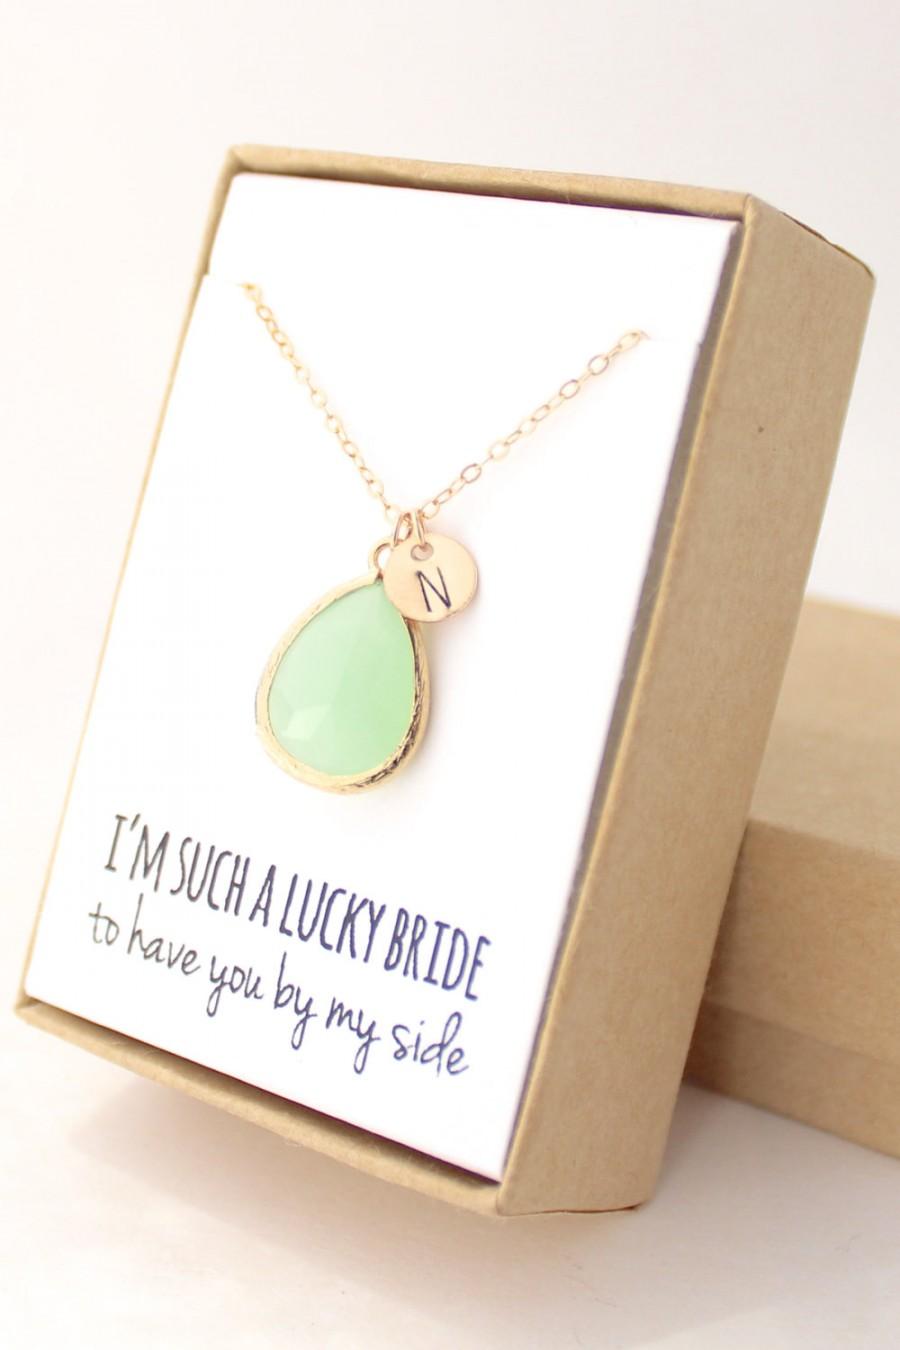 Hochzeit - Light Mint / Gold Teardrop Necklace - Mint Bridesmaid Necklace - Bridesmaid Gift Jewelry - Mint and Gold Necklace - NB1